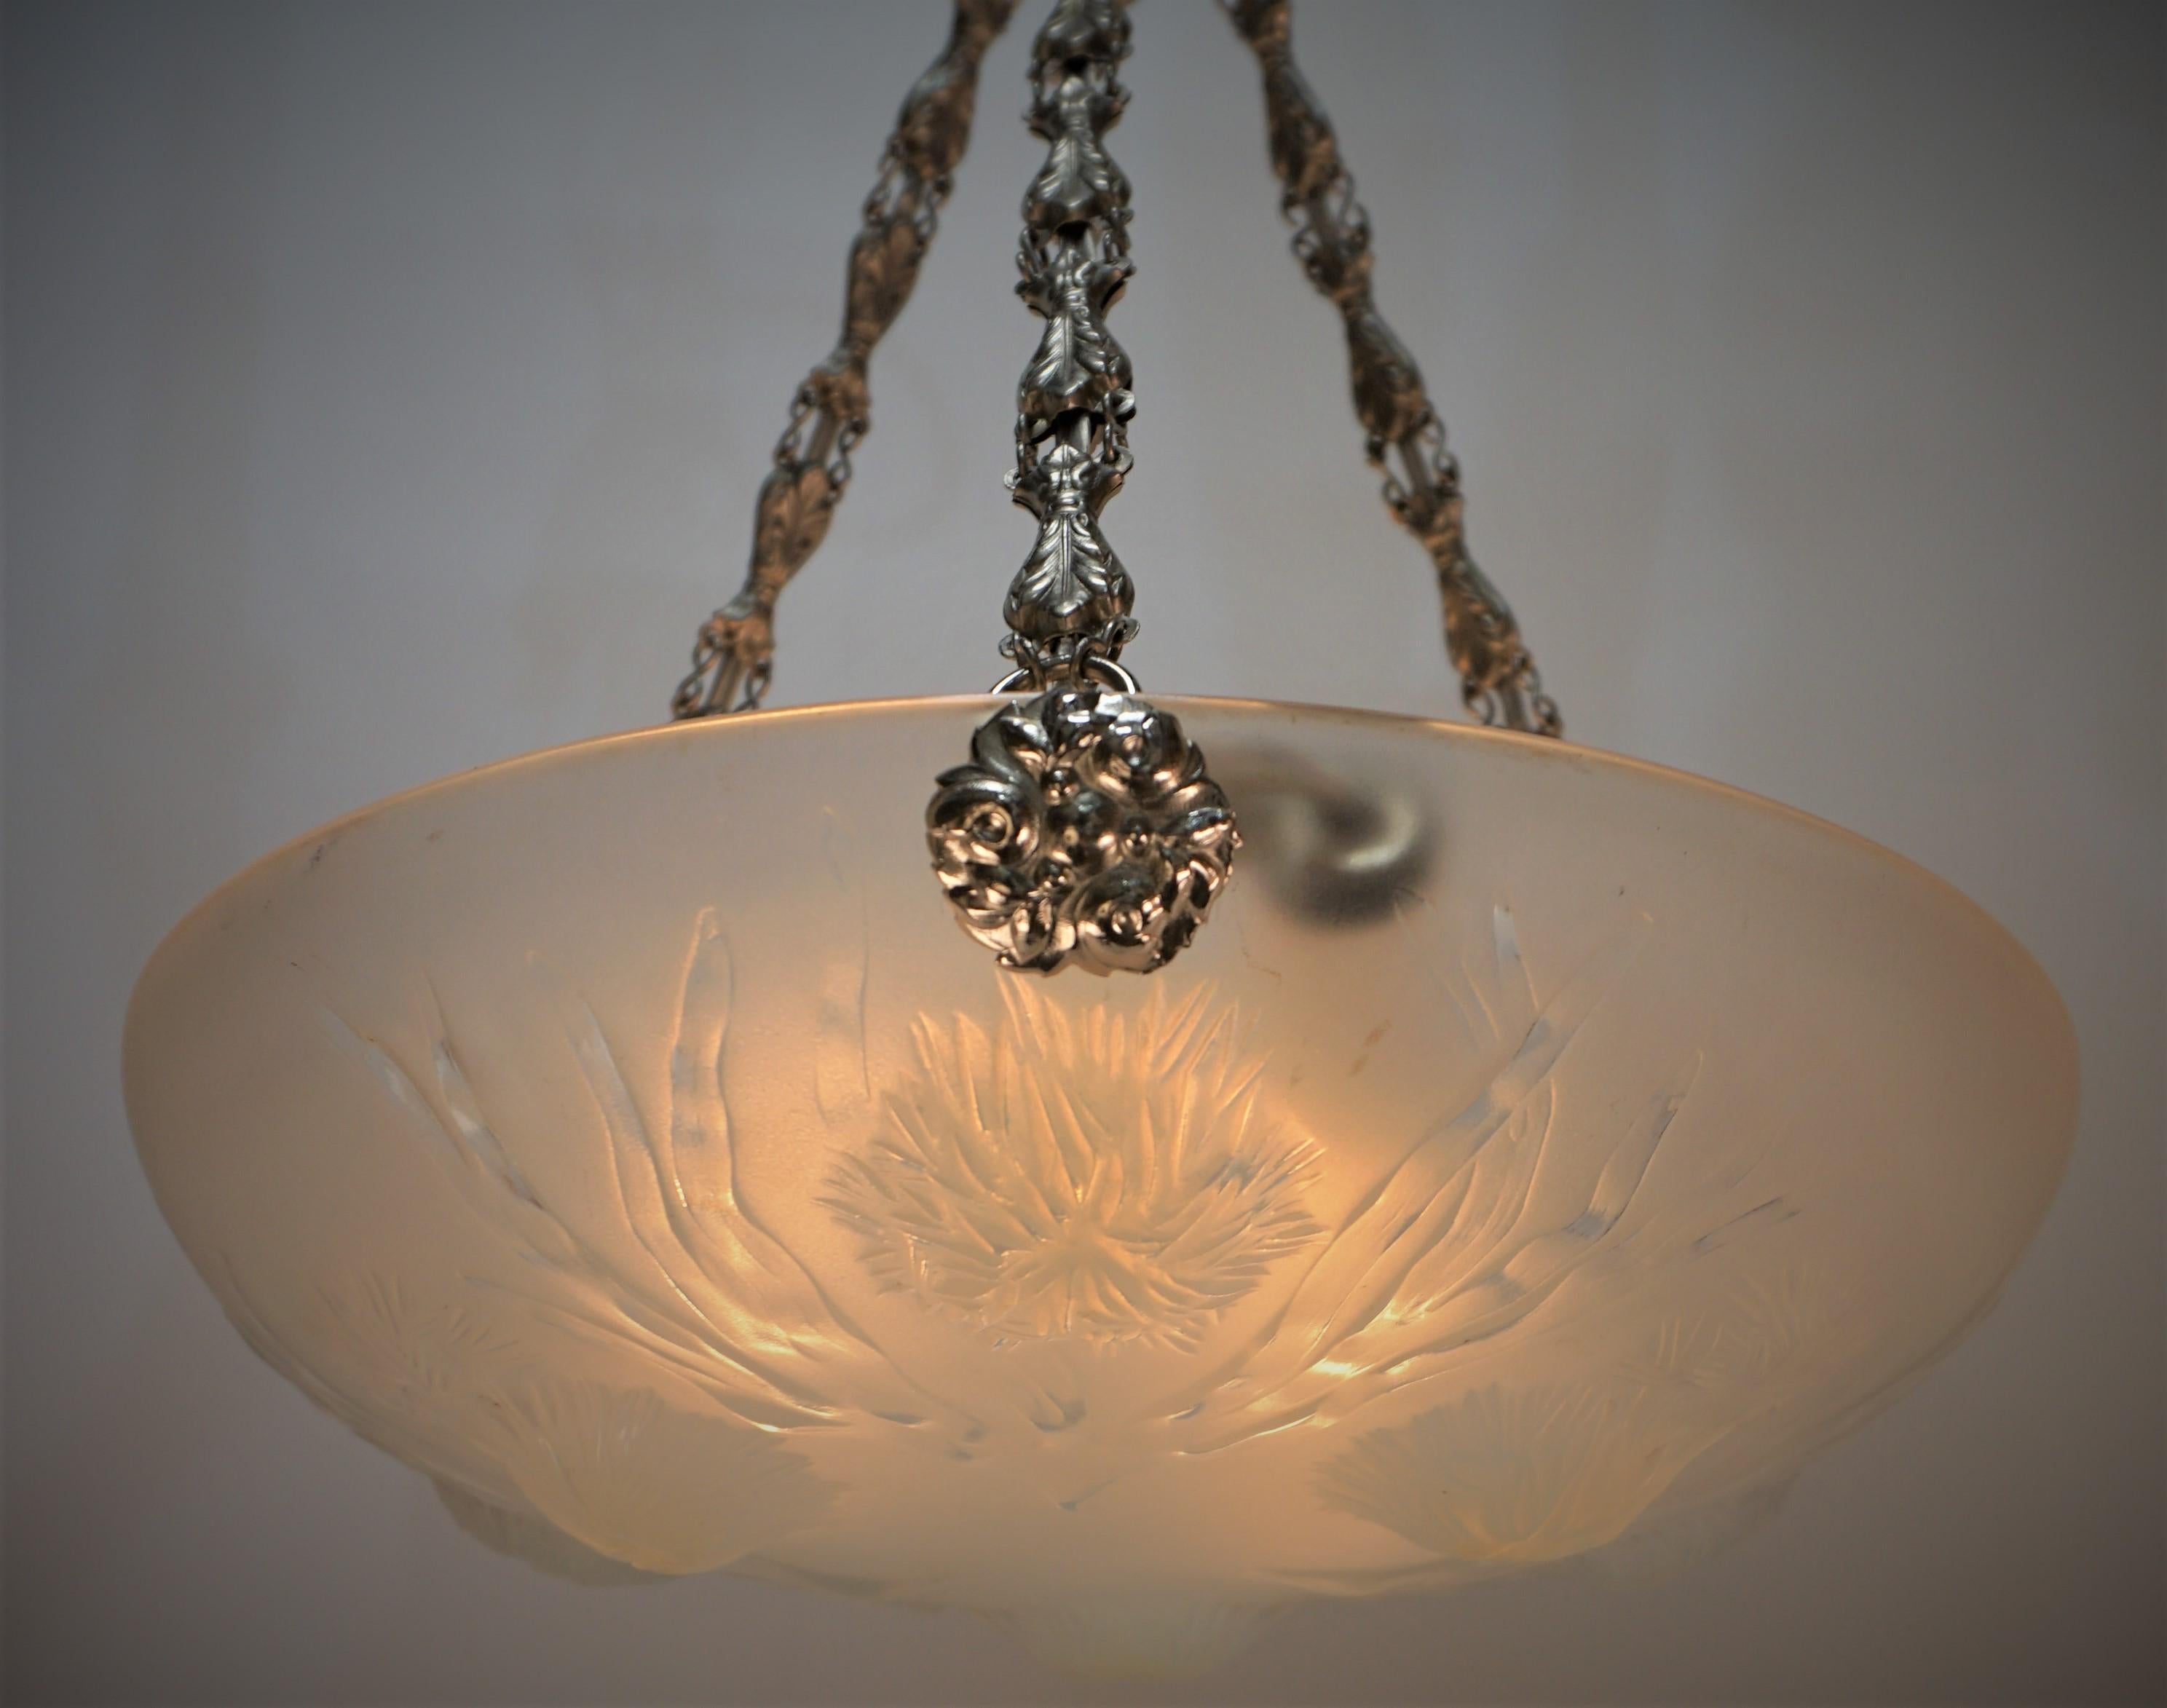 Fabulous 1920's sea urchin design opalescent glass and nickel on brass petit three light chandelier.
Marked Sabino France
Professionally rewired and ready for installation, 100 watts max each light blubs.